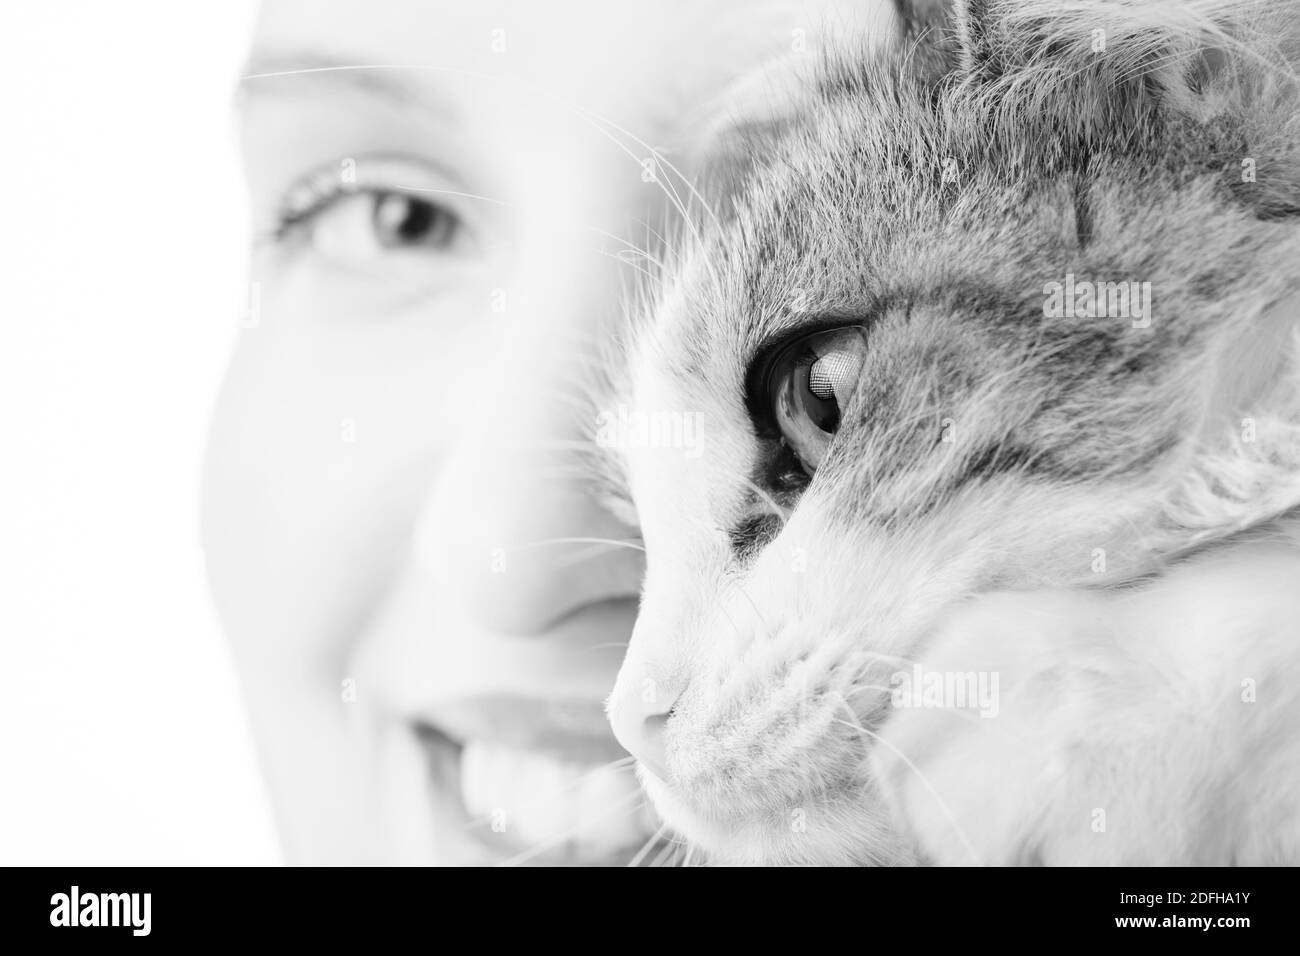 smiling female face with cat close-up portrait on white background, monochrome Stock Photo